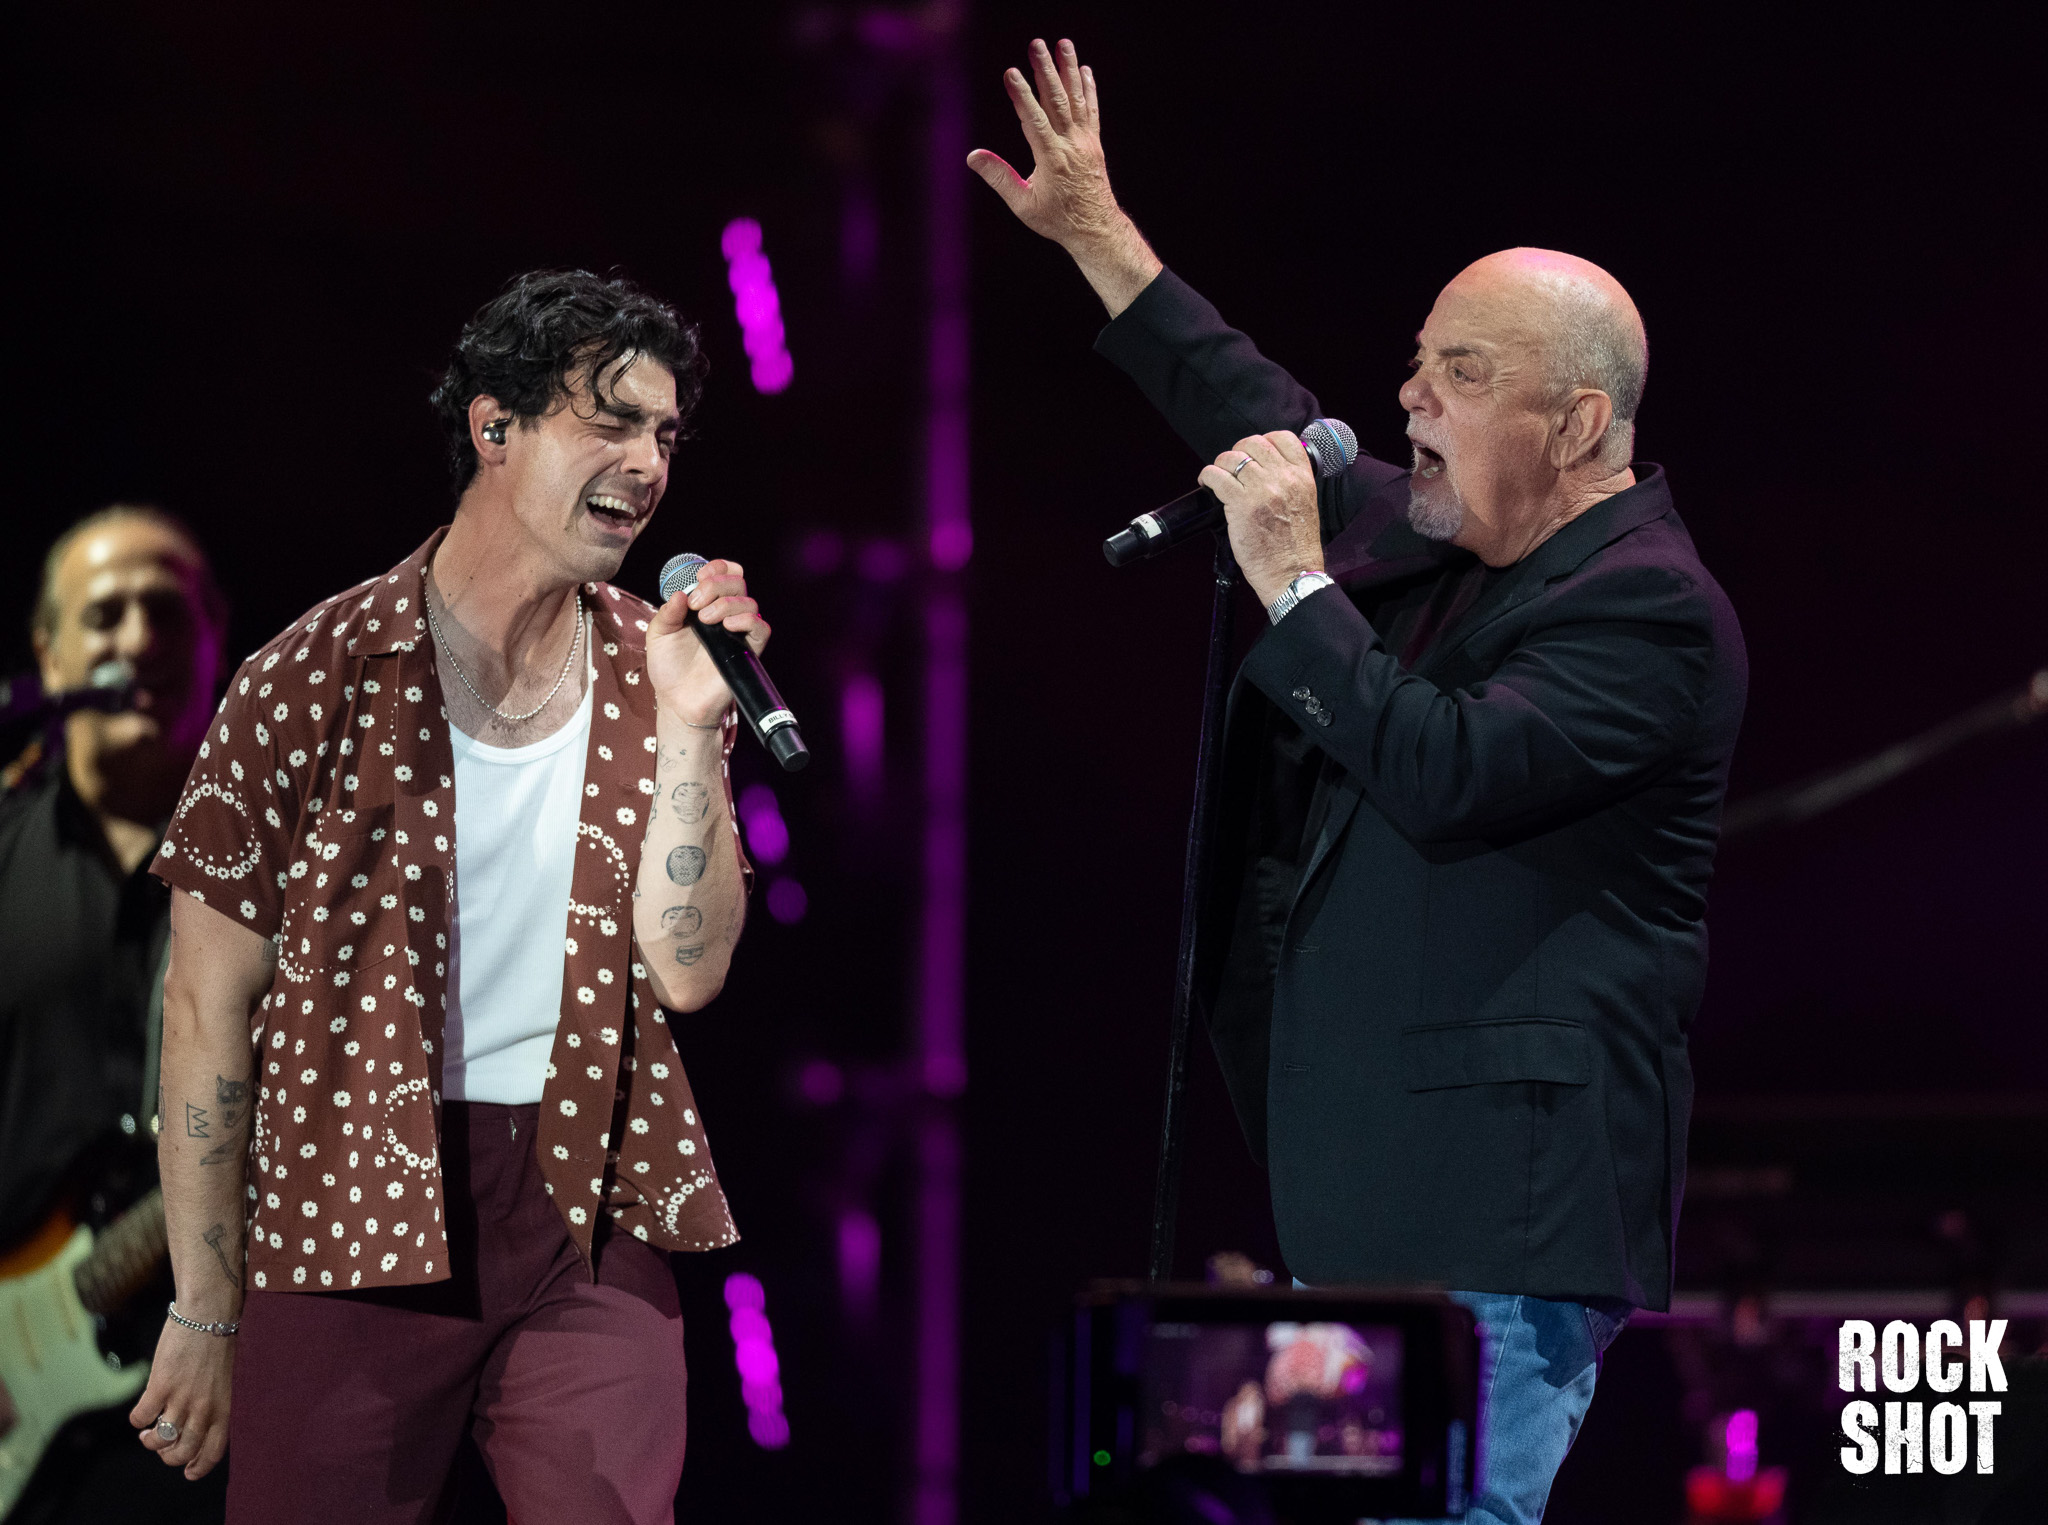 Joe Jonas and Billy Joel perform on stage on Day 8 of American Express Presents BST Hyde Park on July 7, 2023 in London, United, Kingdom. (Photo by Dave Hogan/Hogan Media/Shutterstock)